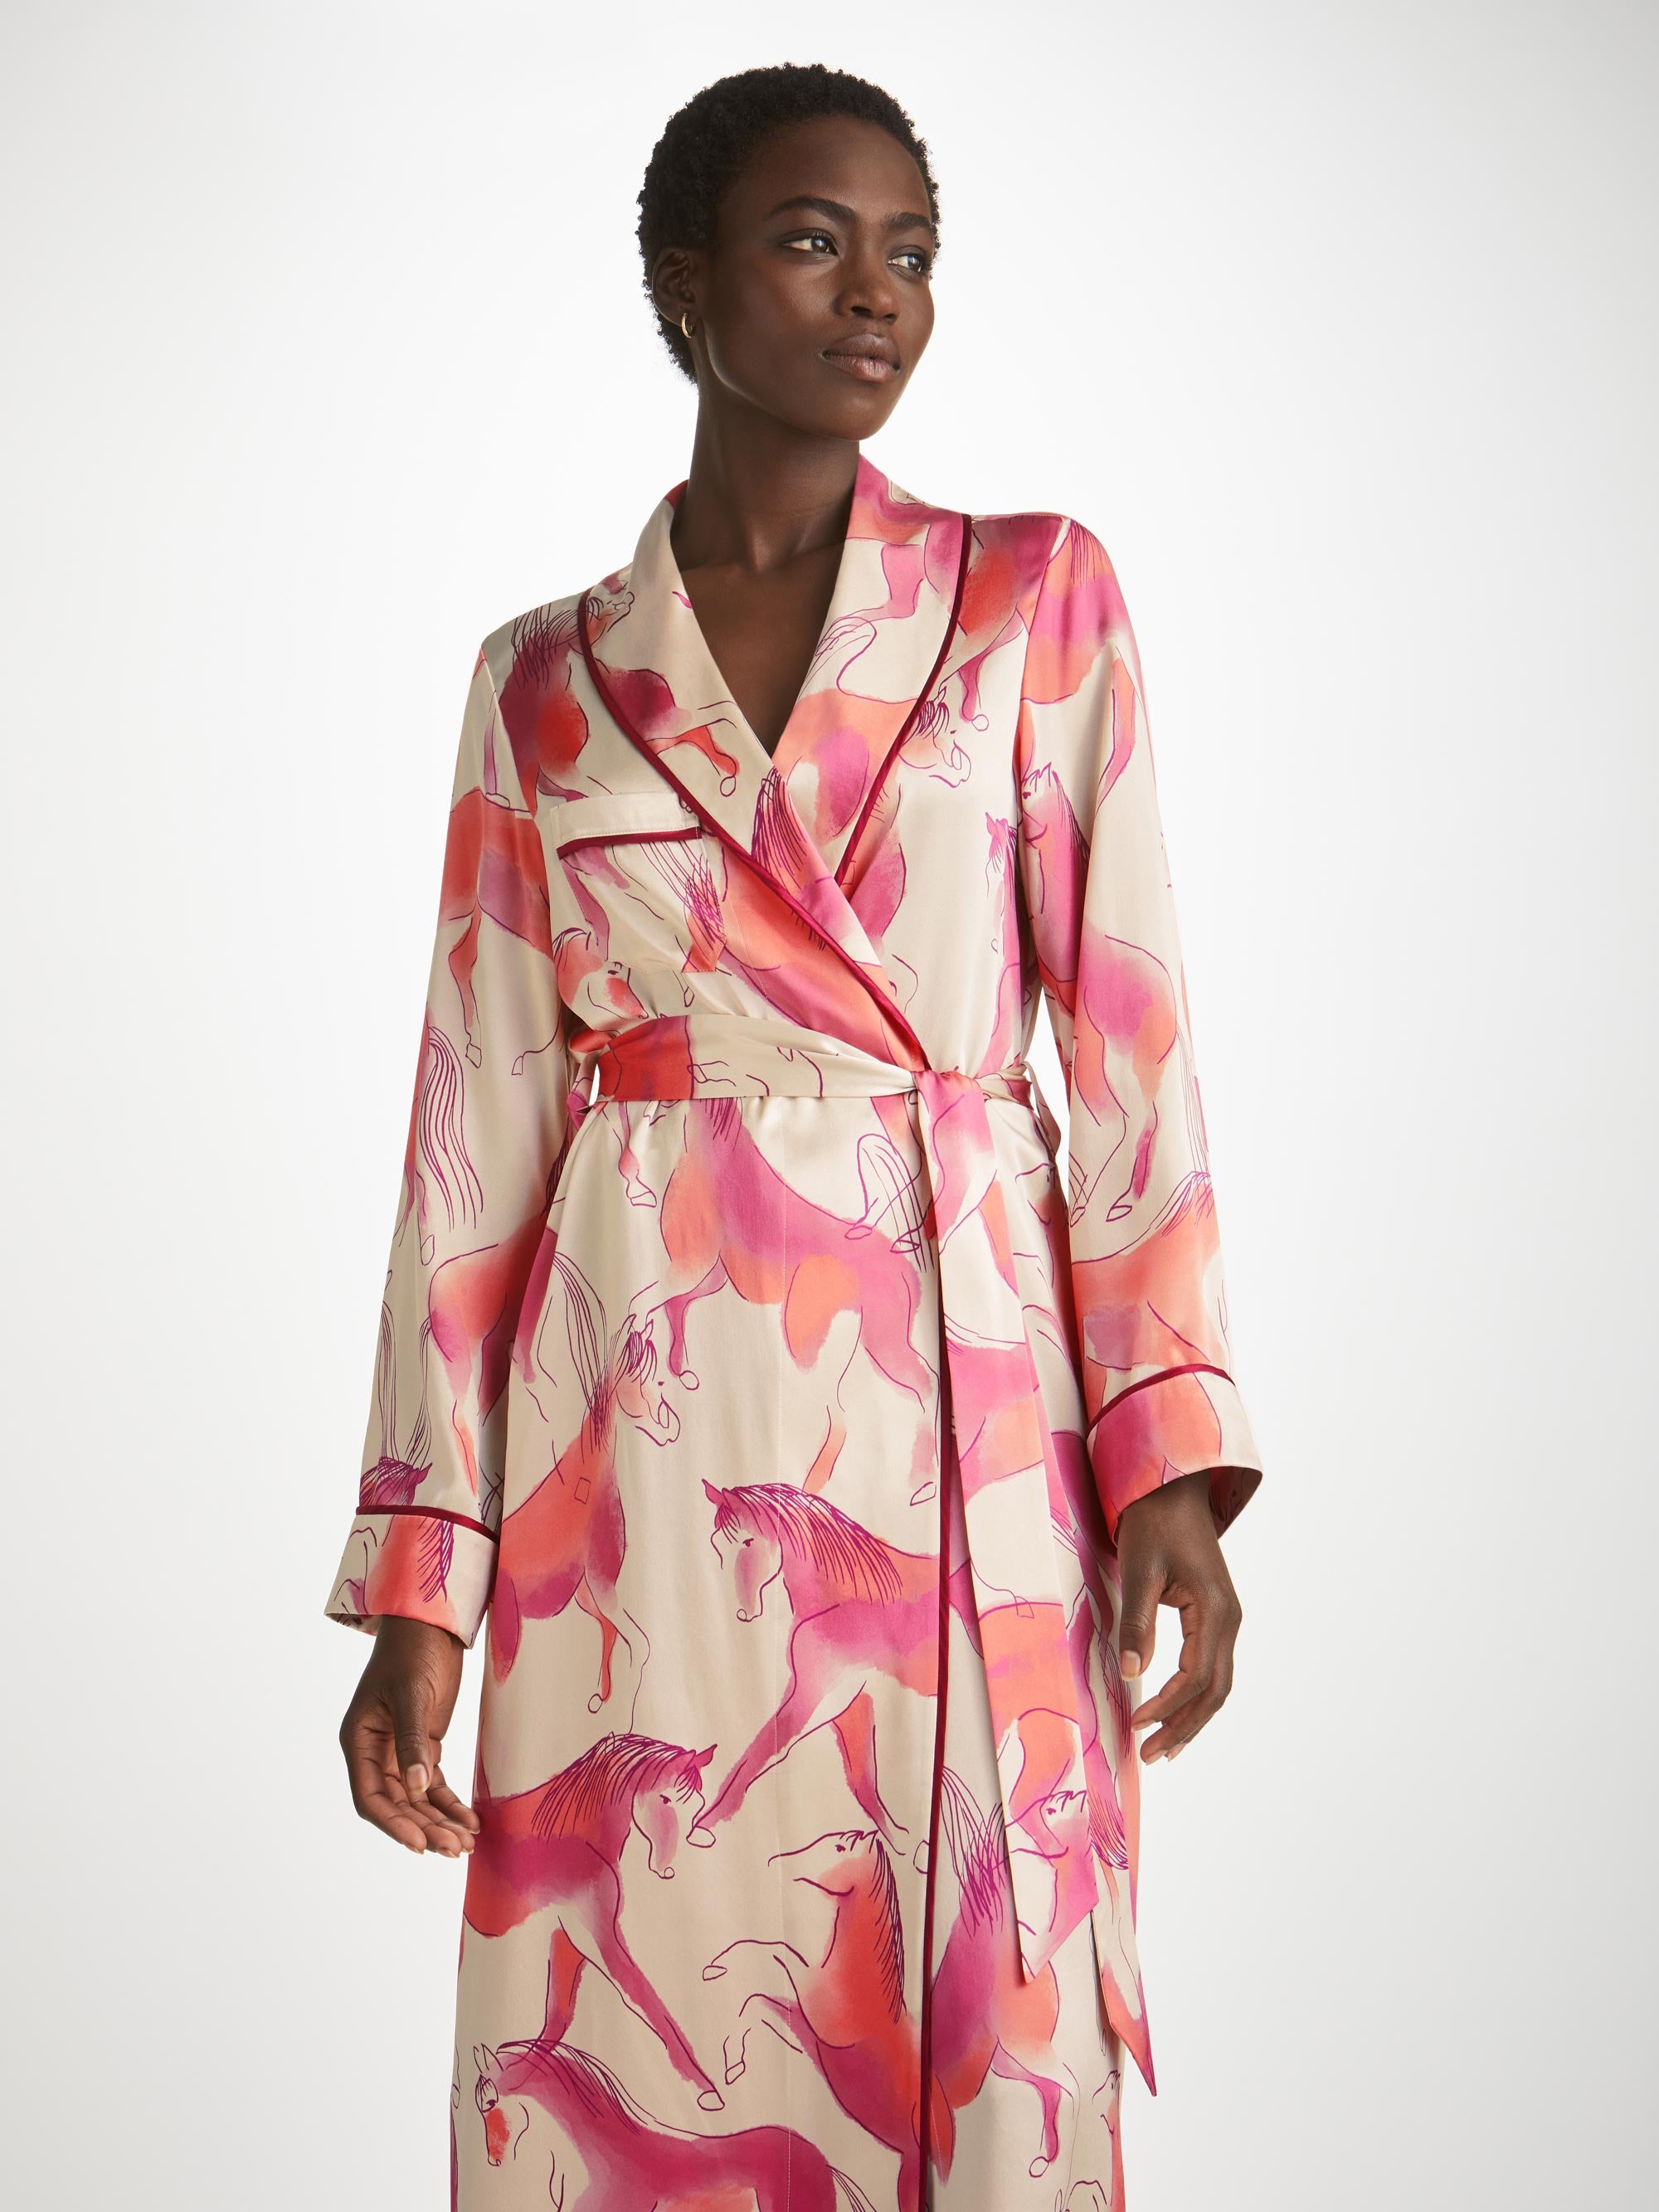 Satin Robes, robe dresses and bathrobes for Women